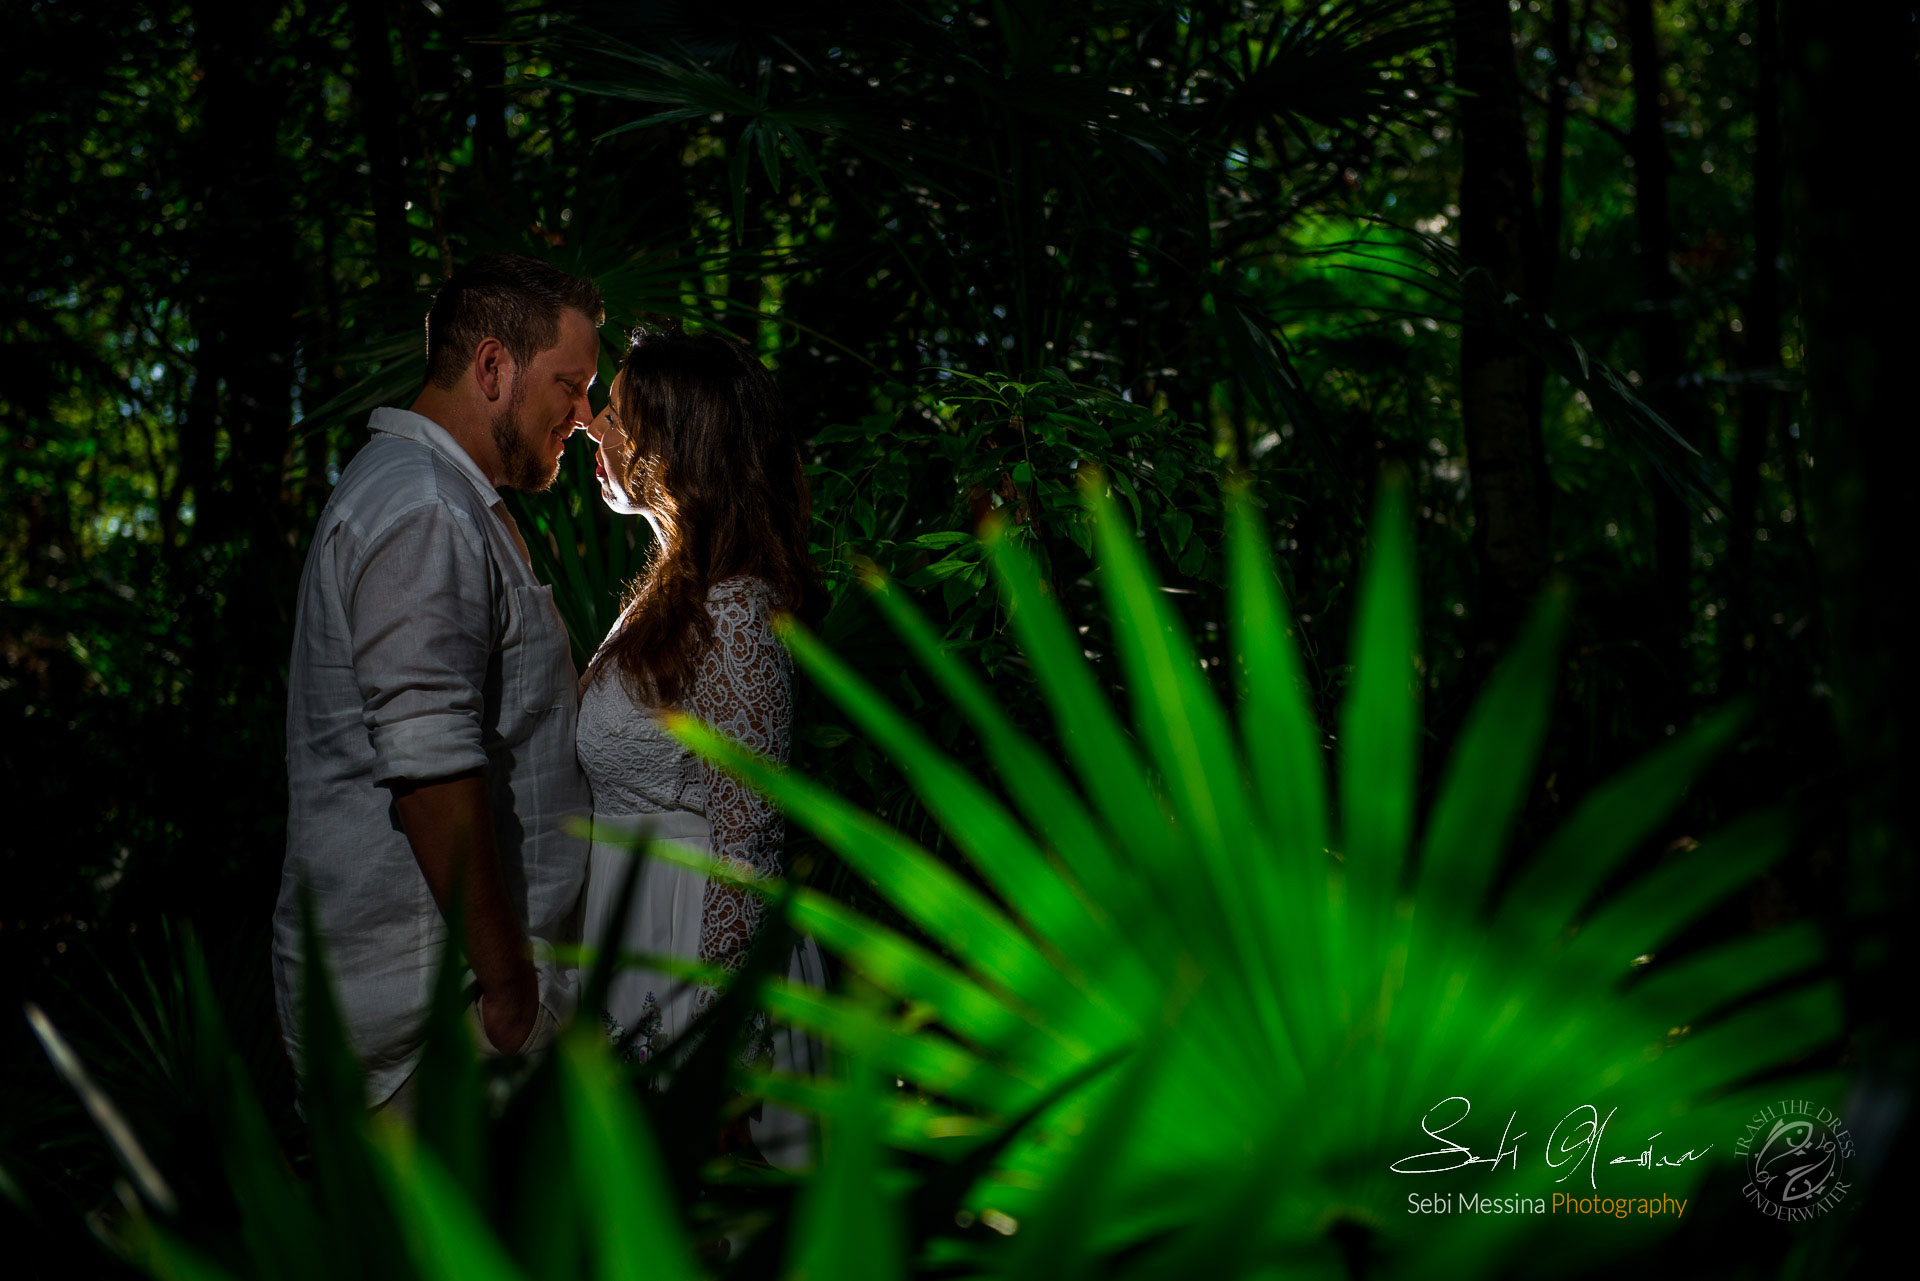 Underwater Trash The Dress in a Mexican Cenote - Sebi Messina Photography